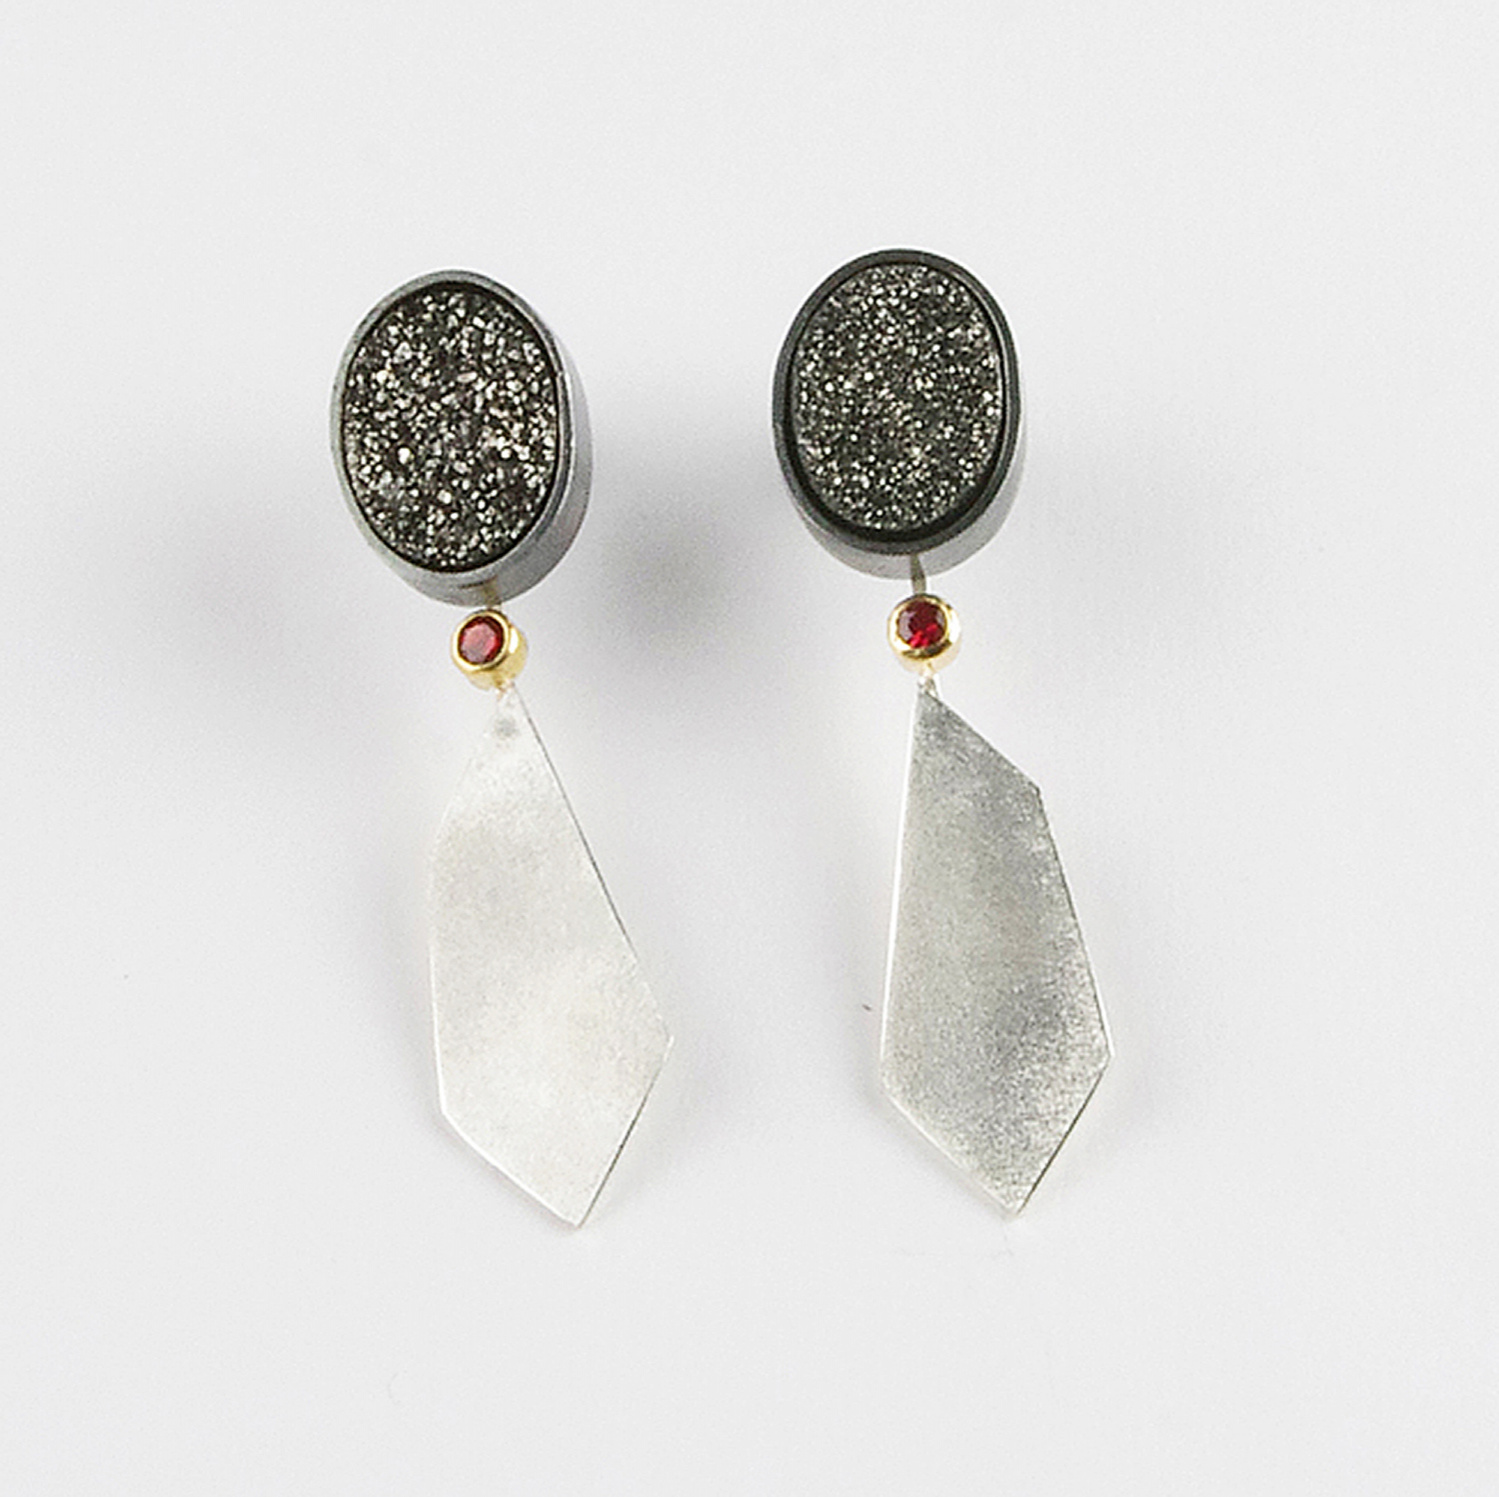 Earrings by Cathy Timbrell